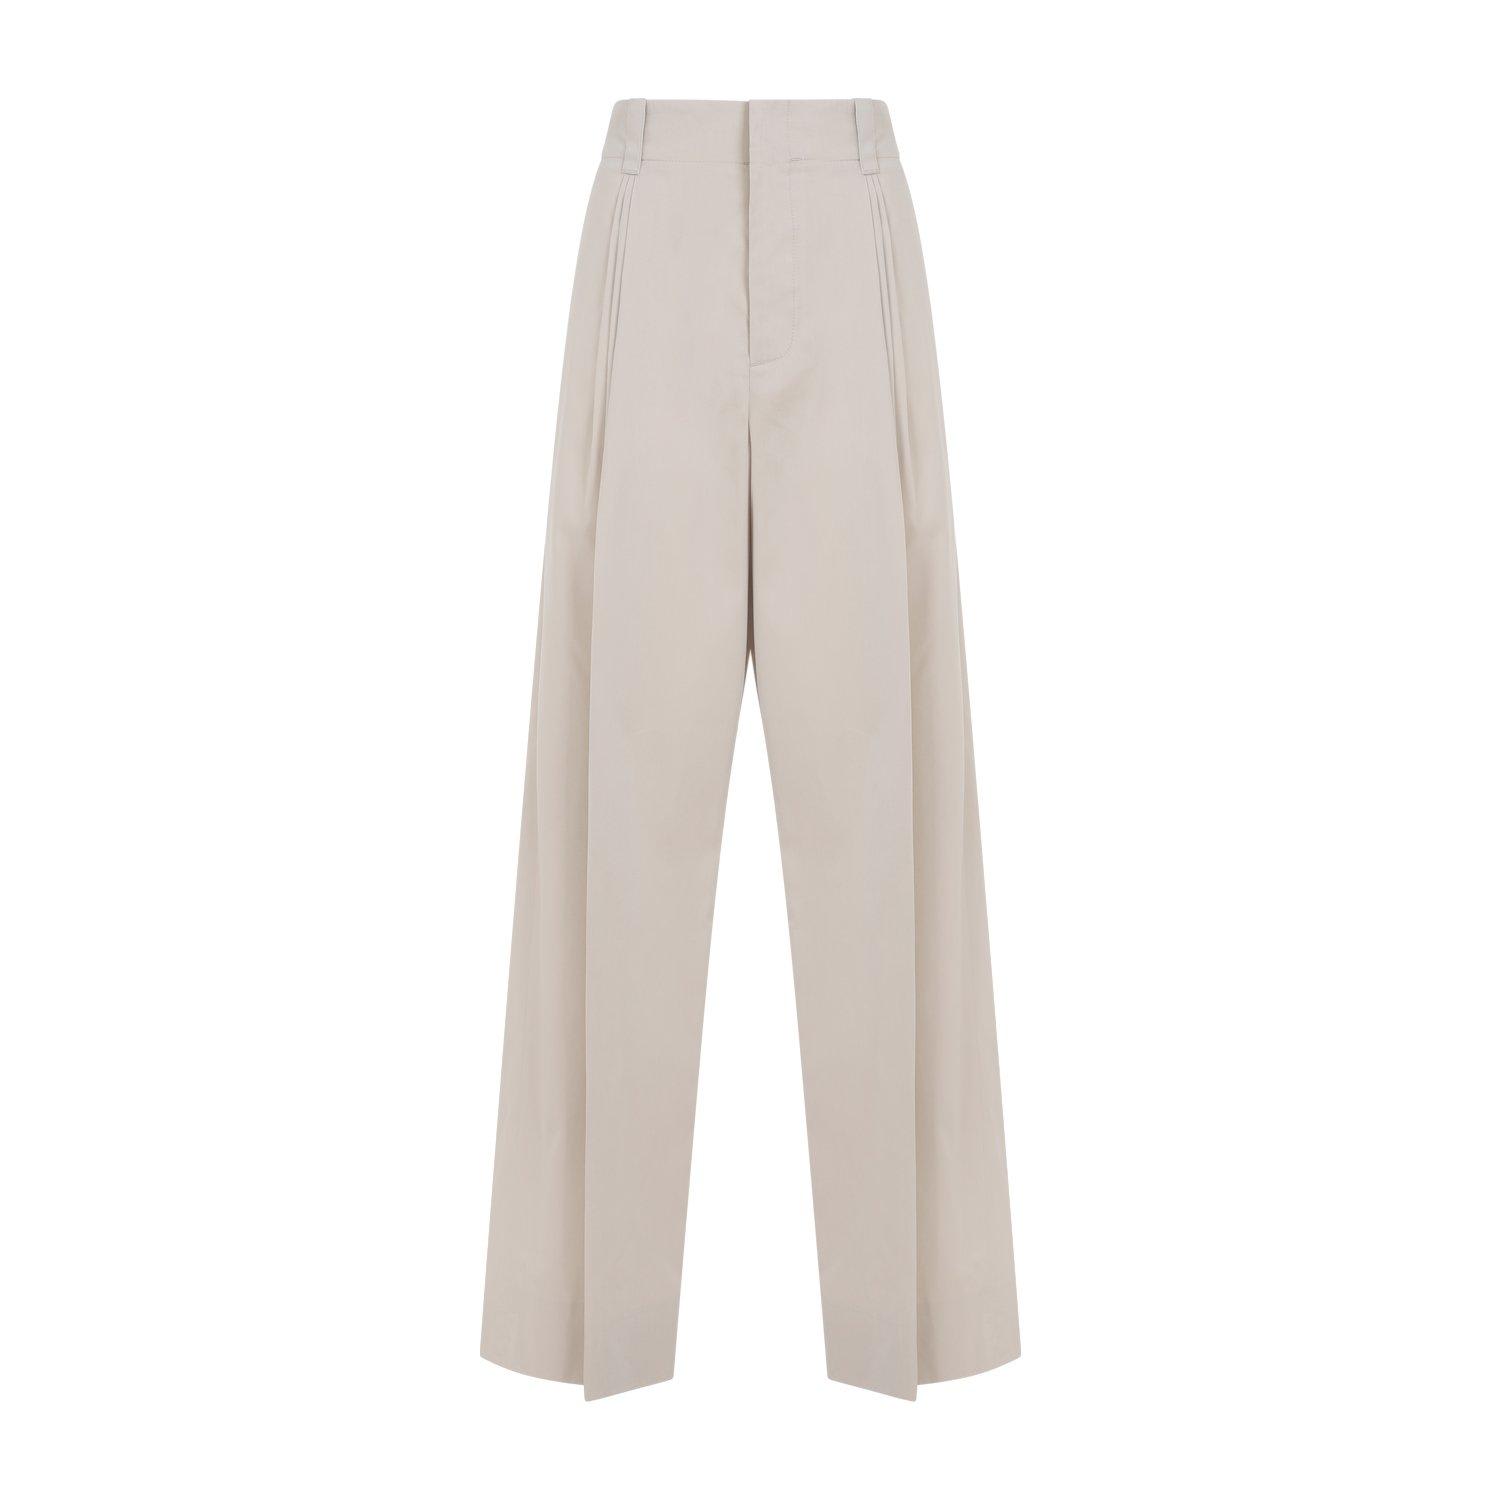 Pleated Detail Tailored Trousers